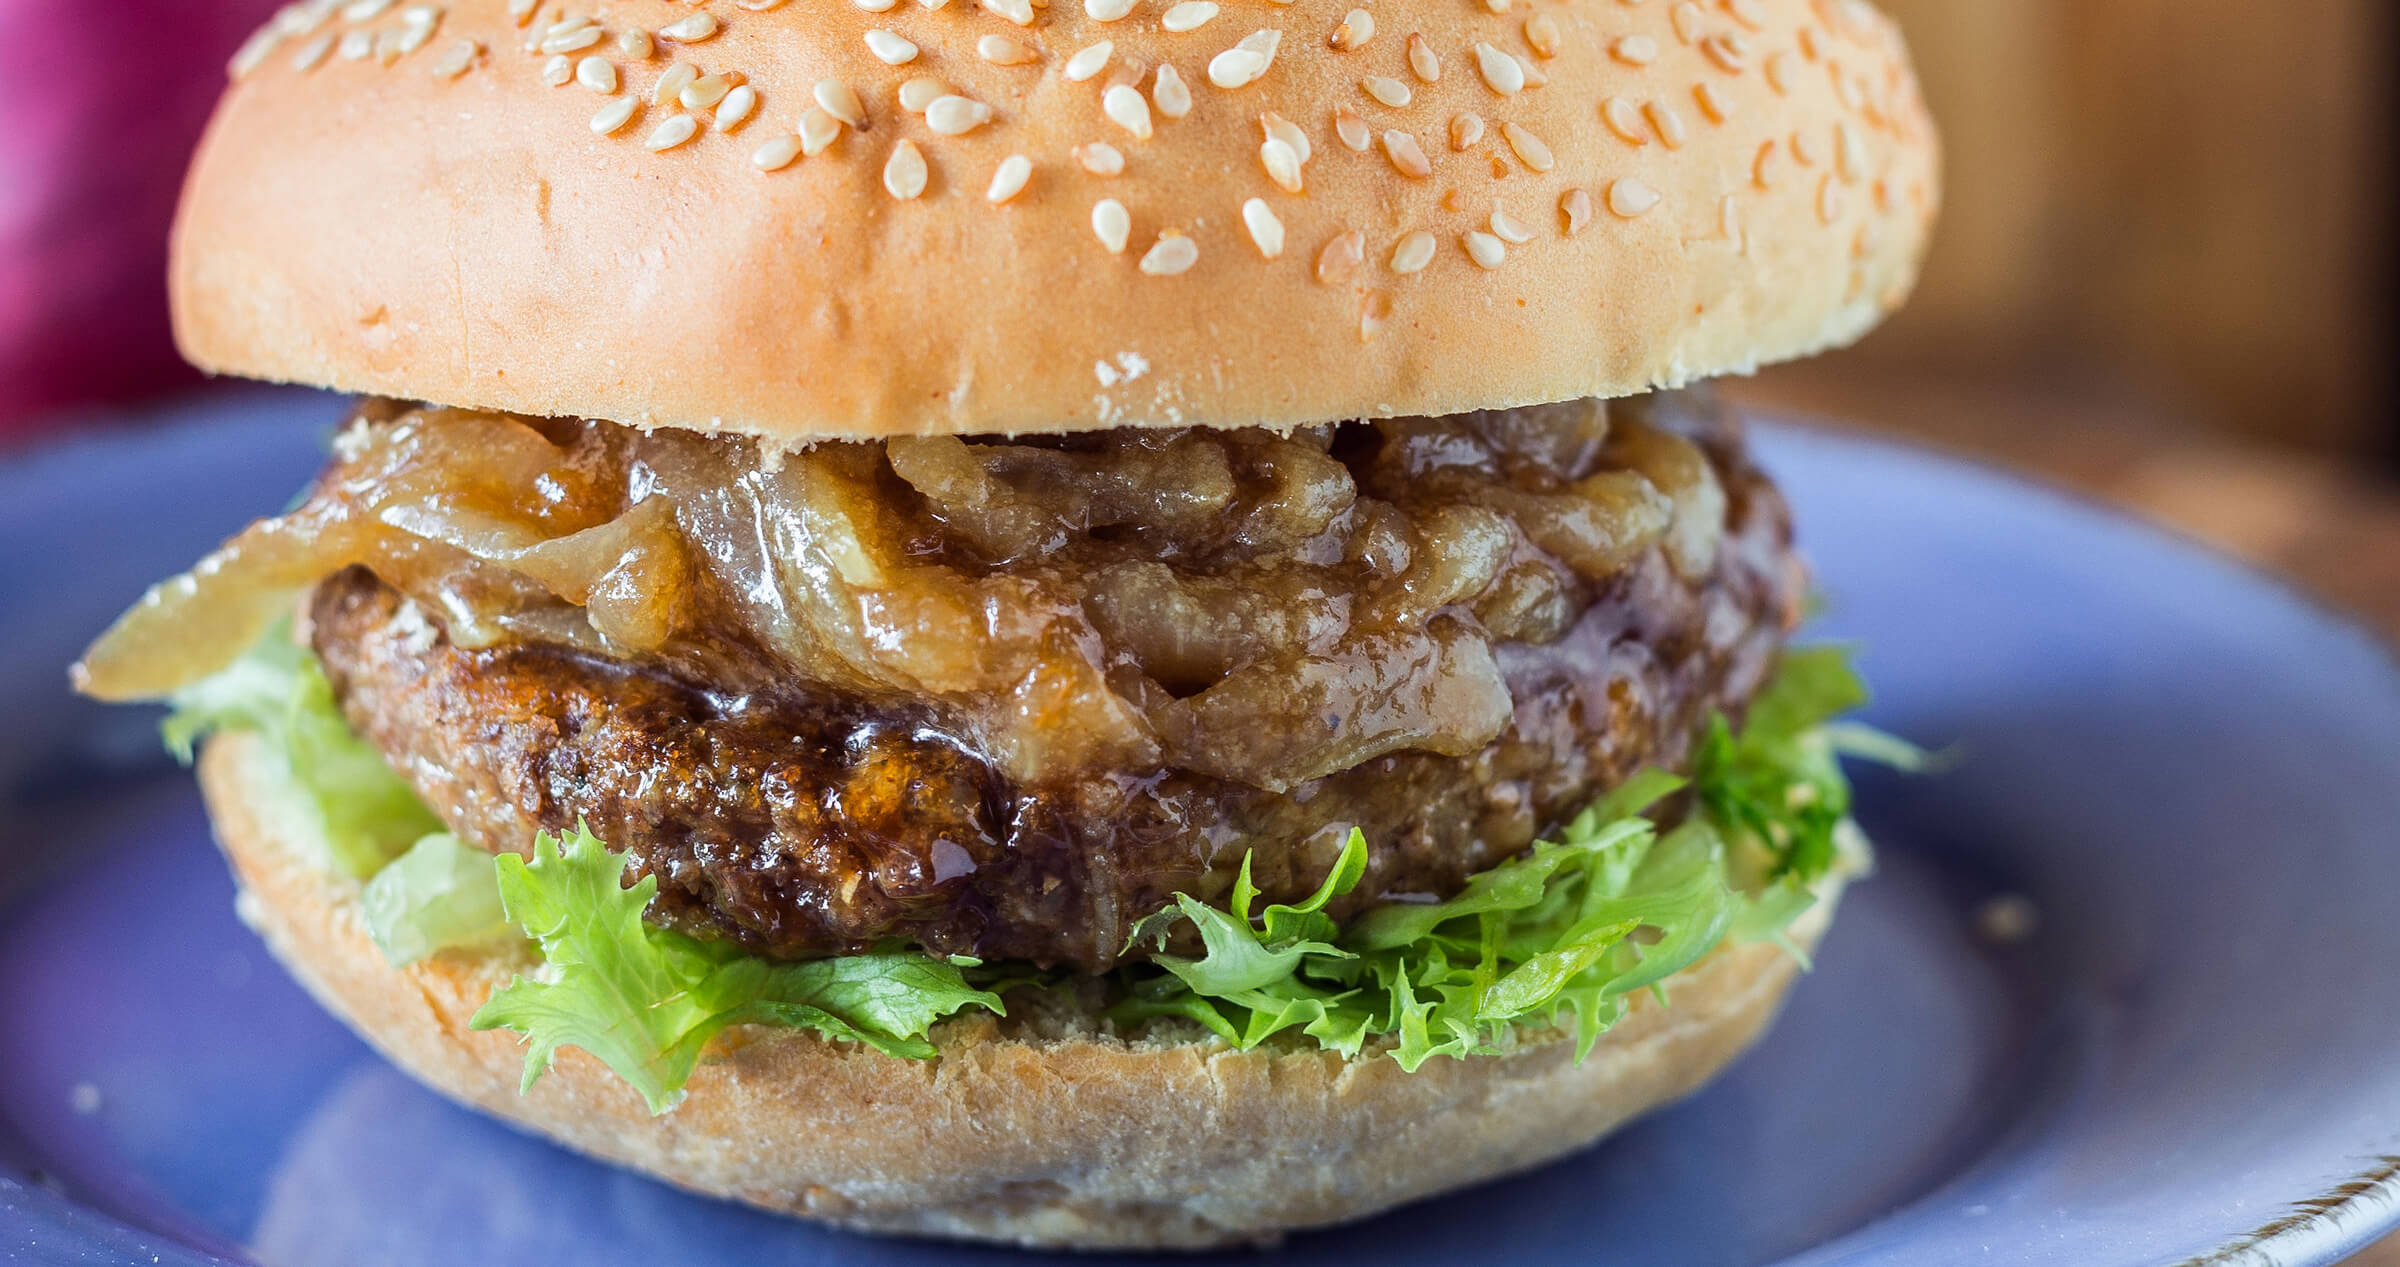 What type of patty is used in a teriyaki burger?